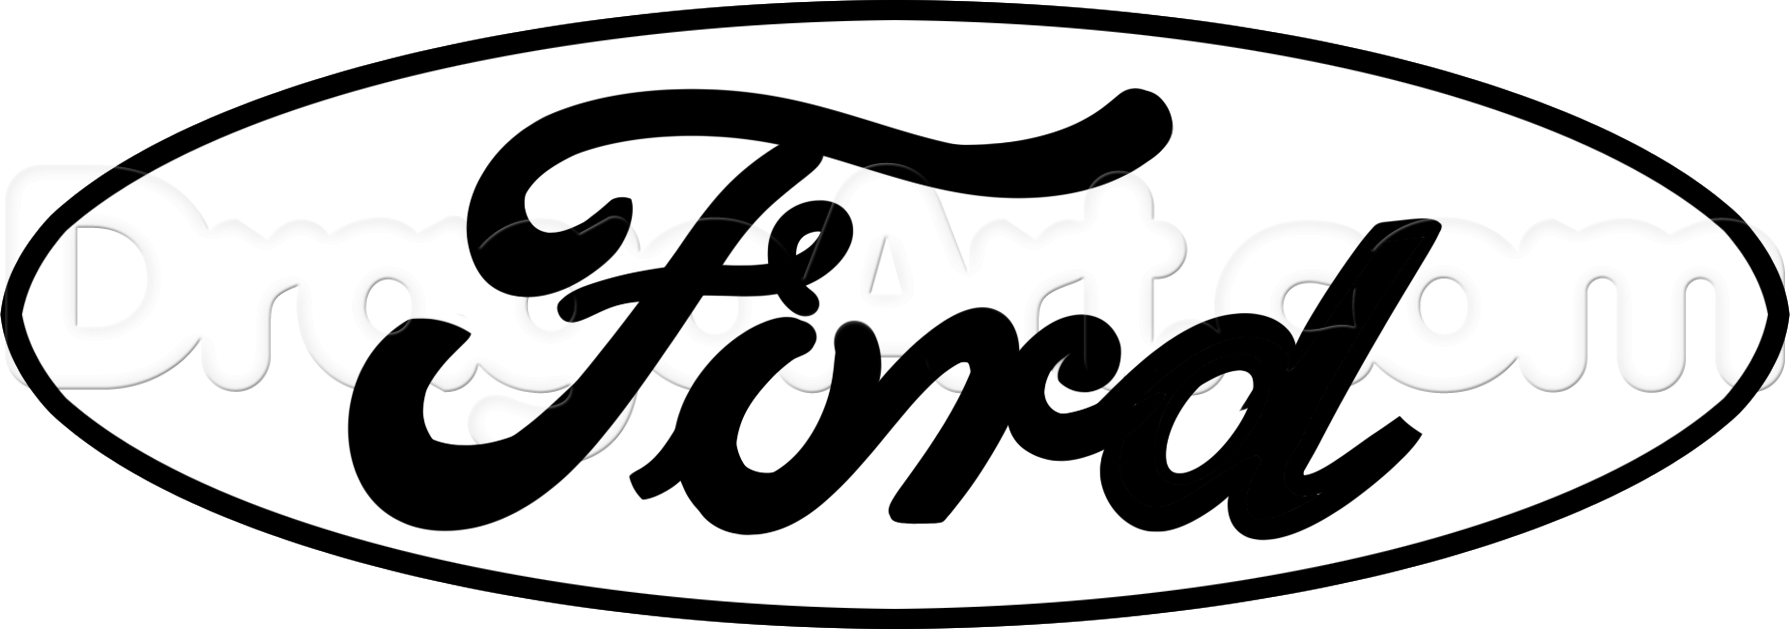 Cartoon Ford Logo - How to Draw the Ford Logo, Step by Step, Symbols, Pop Culture, FREE ...